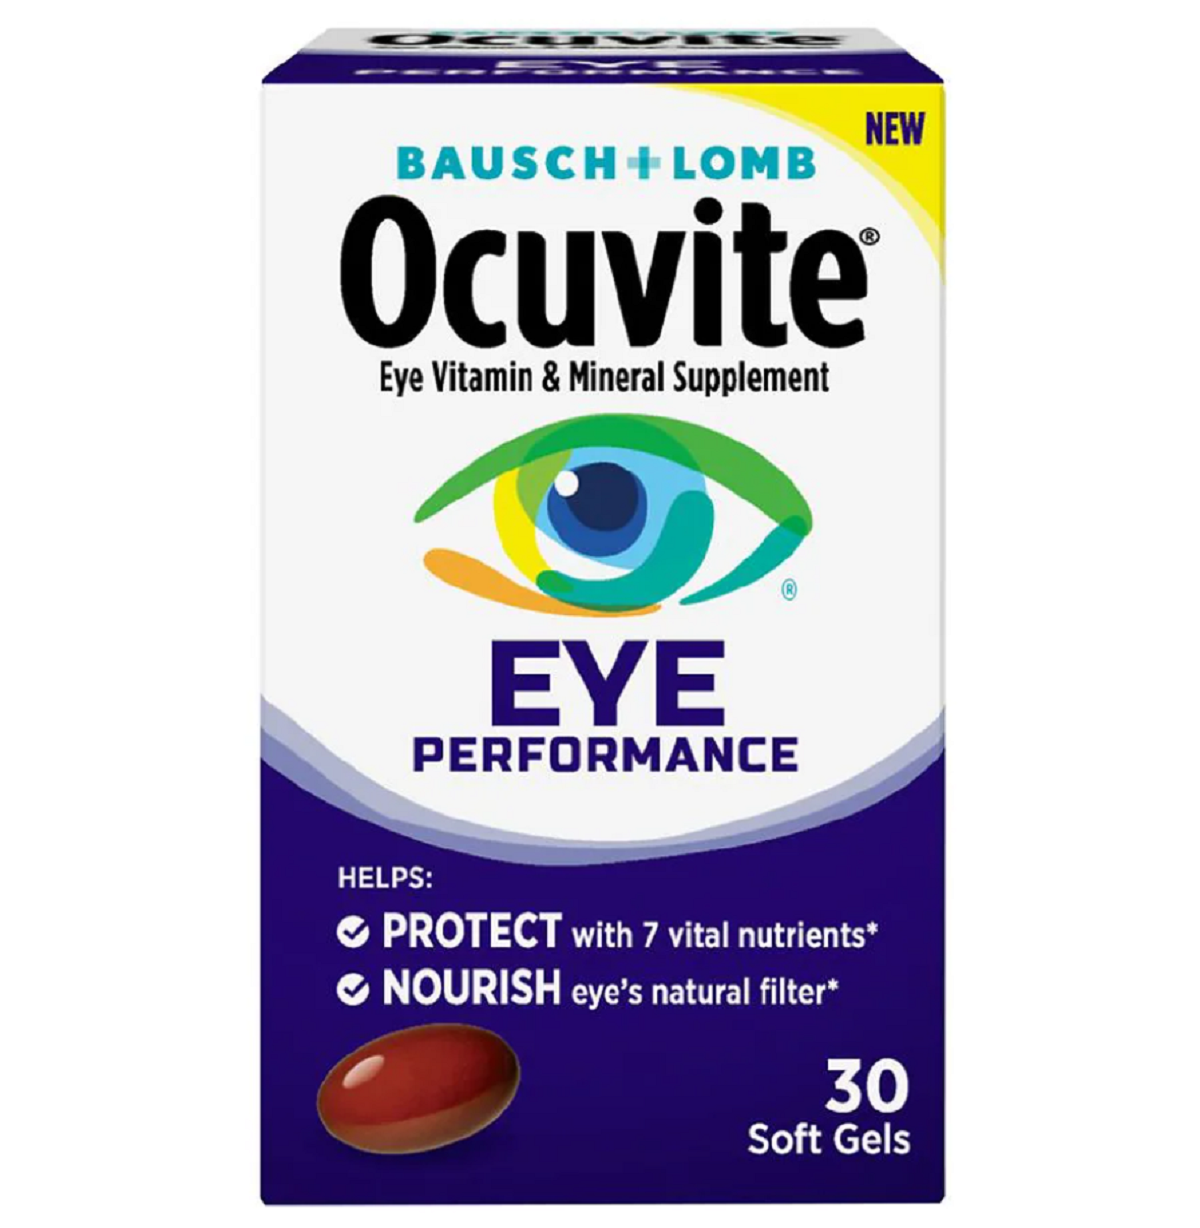 Ocuvite Printable Coupon: $5.00 Off Any (1) Ocuvite Product